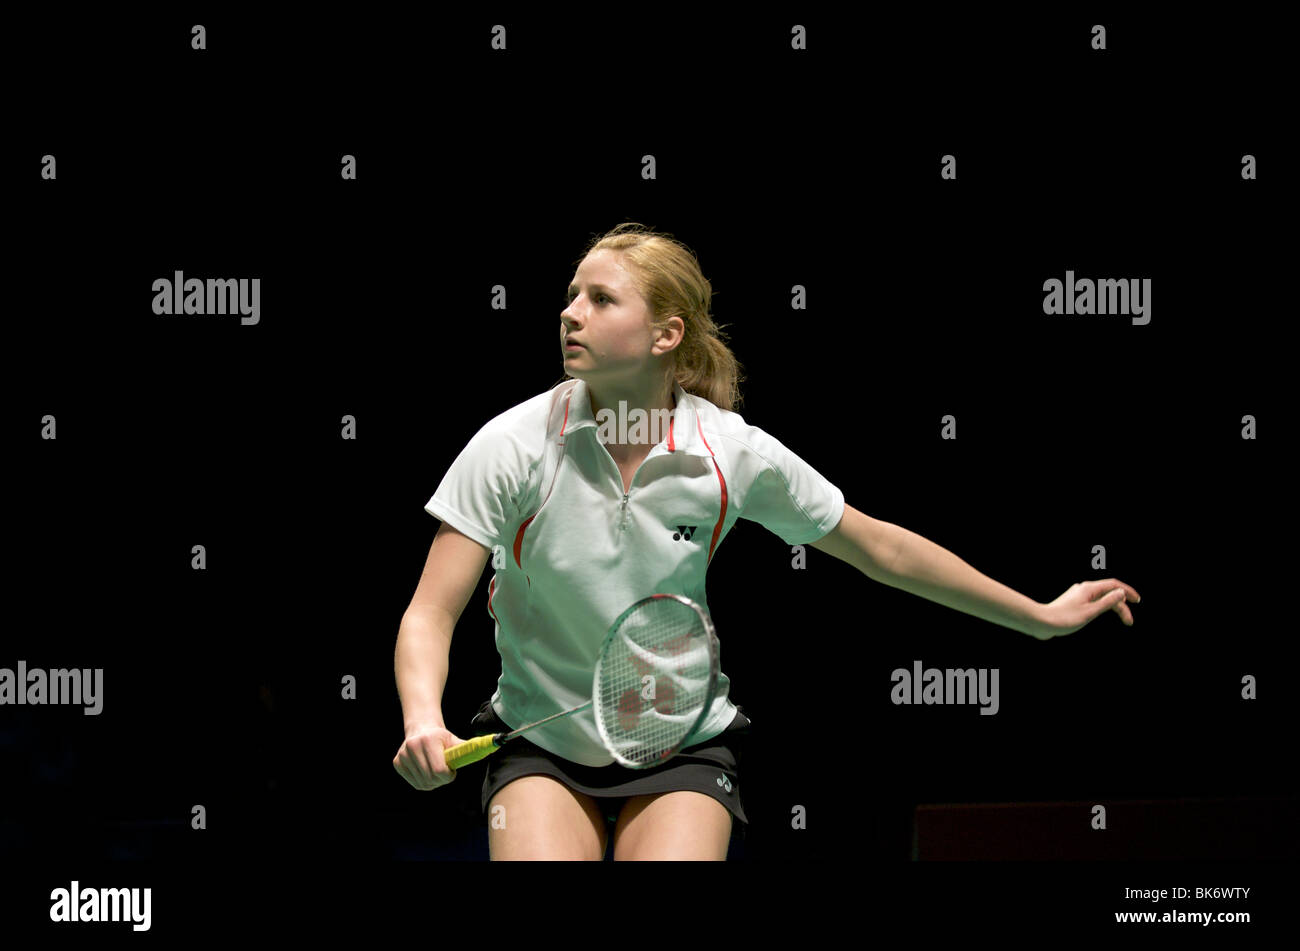 Anna Narel prepares to receive a serve at the European Badminton Championships in Mancester 2010 Stock Photo